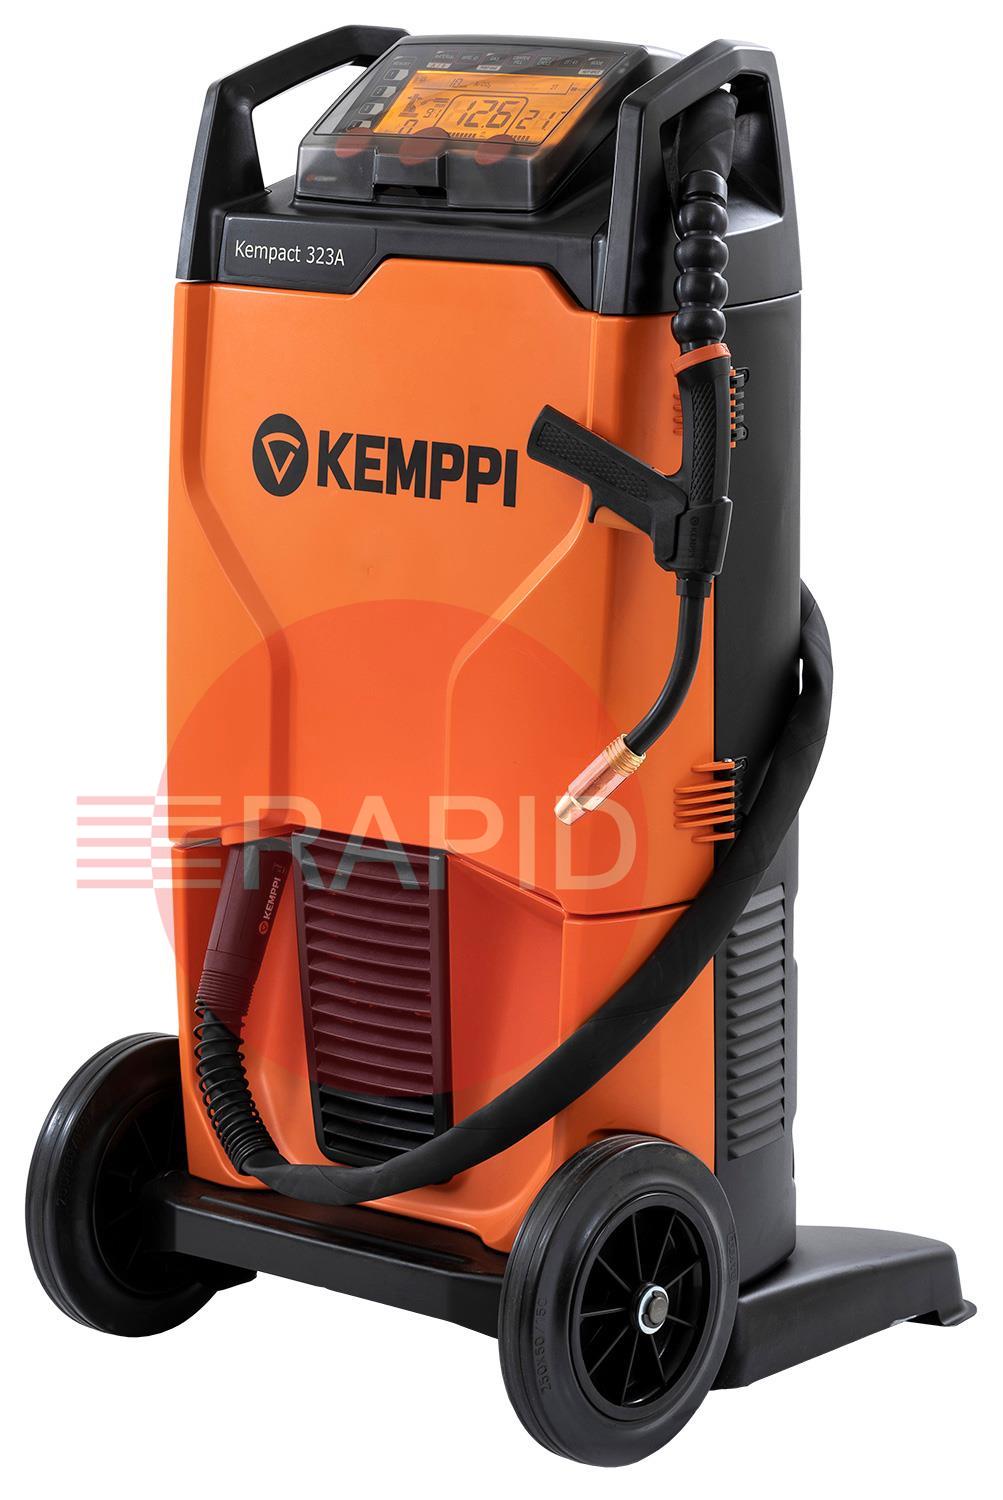 P2275GXE  Kemppi Kempact RA 323A, 320A 3 Phase 400v MIG Welder, with Flexlite GXe 205G 3.5m Torch